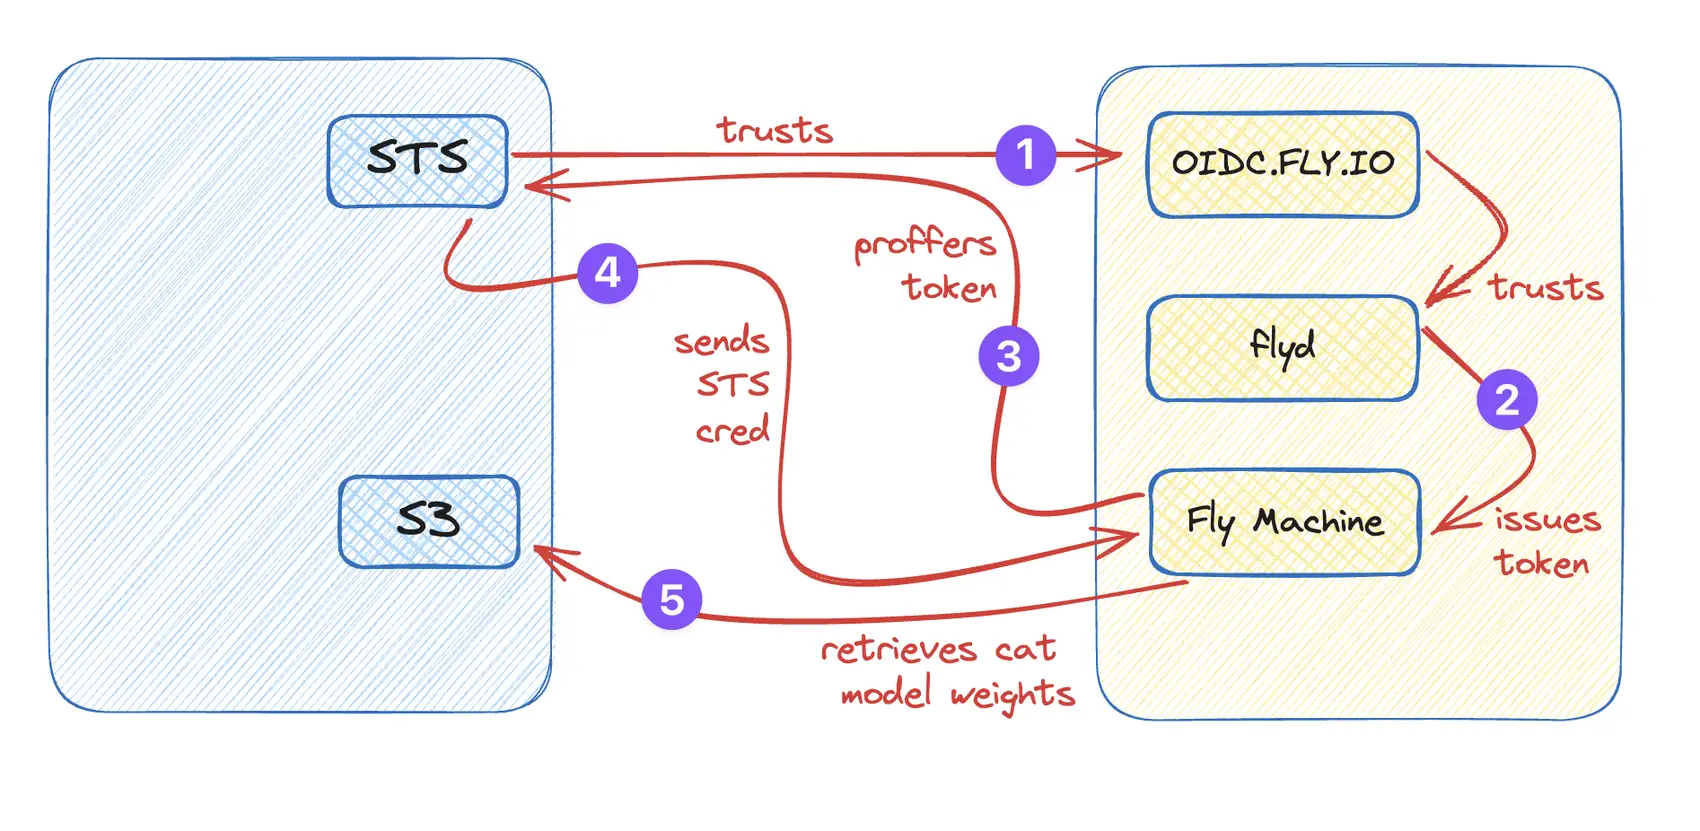 A diagram: STS trusts OIDC.fly.io. OIDC.fly.io trusts flyd. flyd issues a token to the Machine, which proffers it to STS. STS sends an STS cred to the Machine, which then uses it to retrieve model weights from S3.